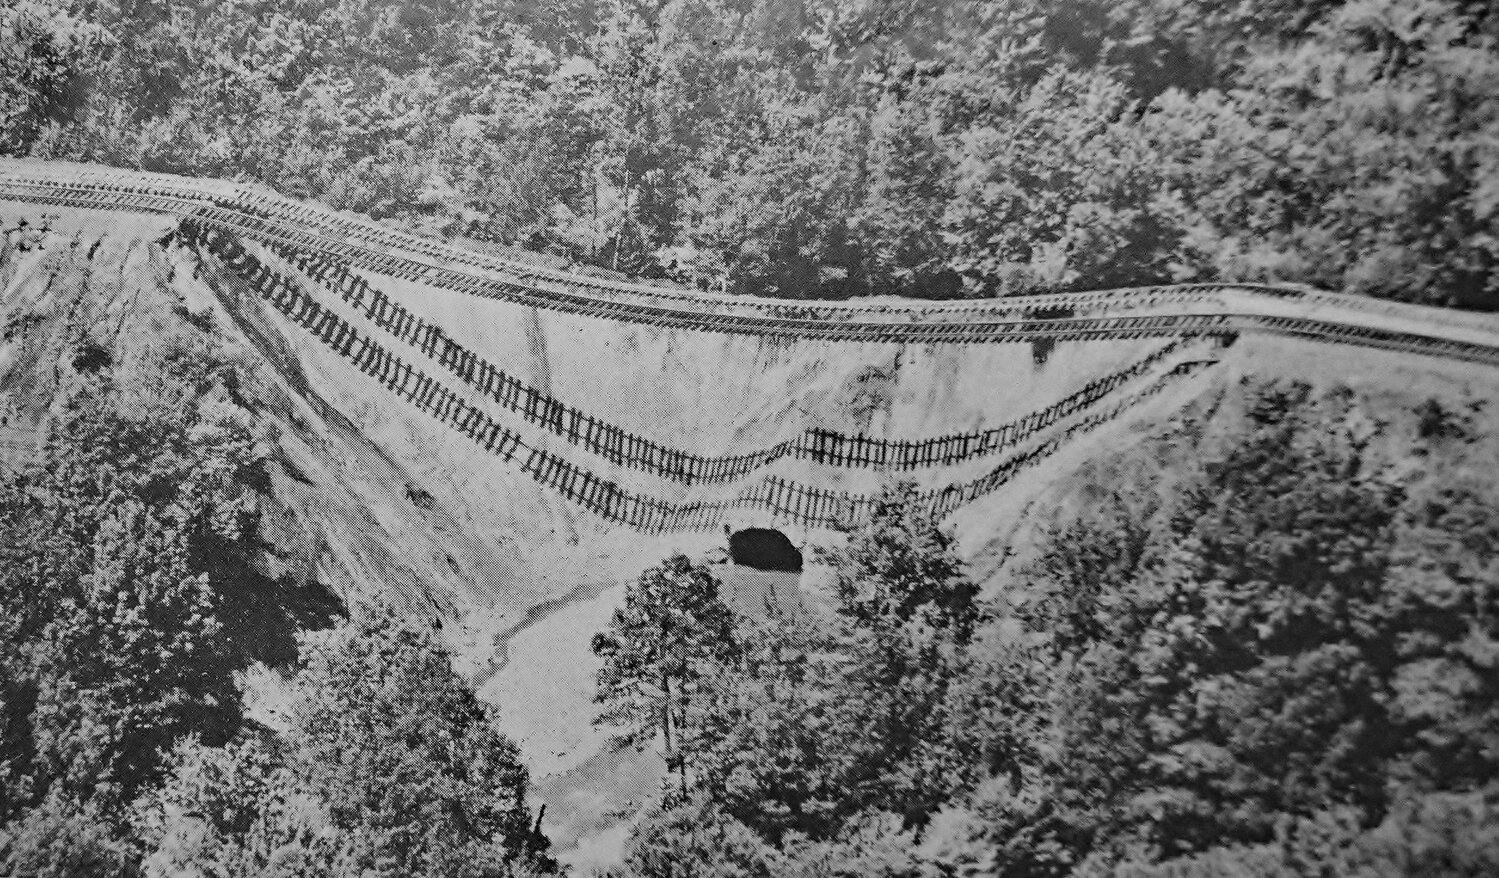 DL&W tracks hanging in the air after wash-out at Devil’s Hole - taken during fly-over by U.S. Army Signal Corps, August 1955. Notice the culvert at the base.